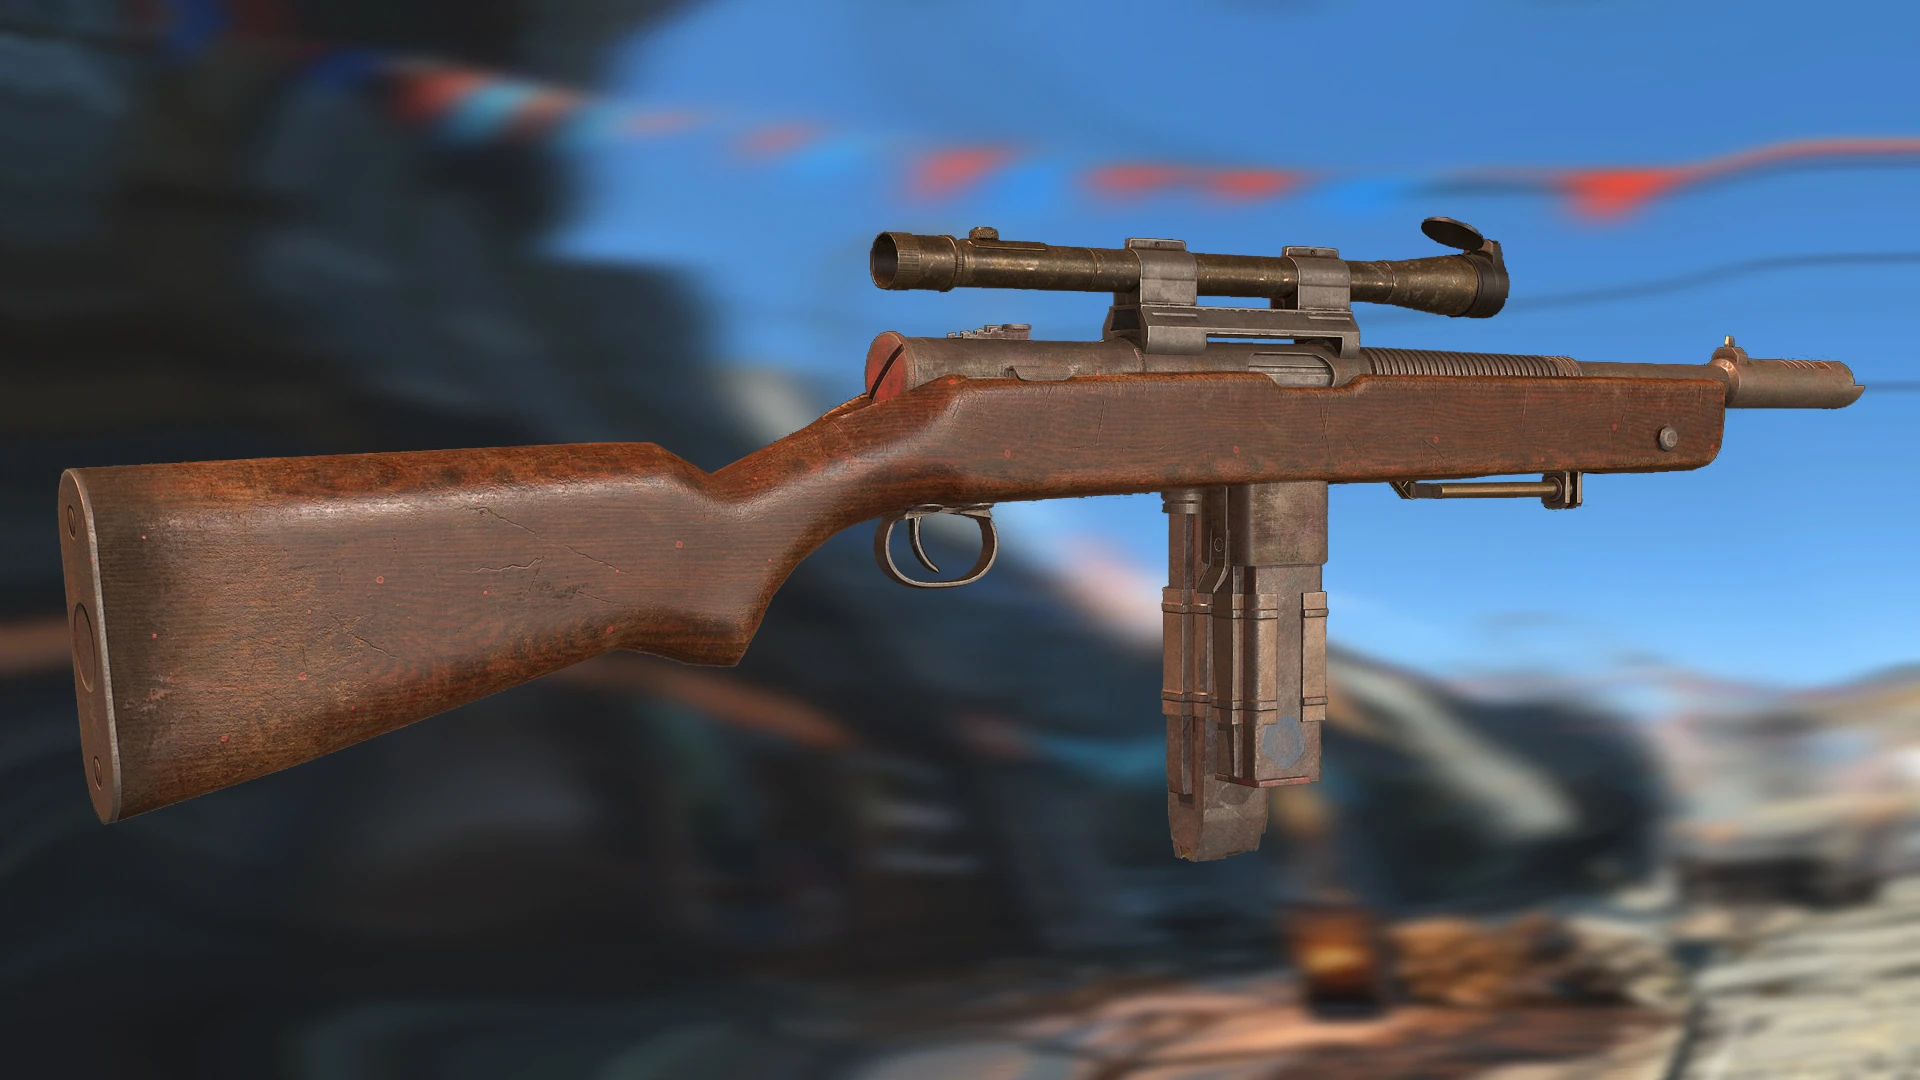 fallout 4 rifles or pistols